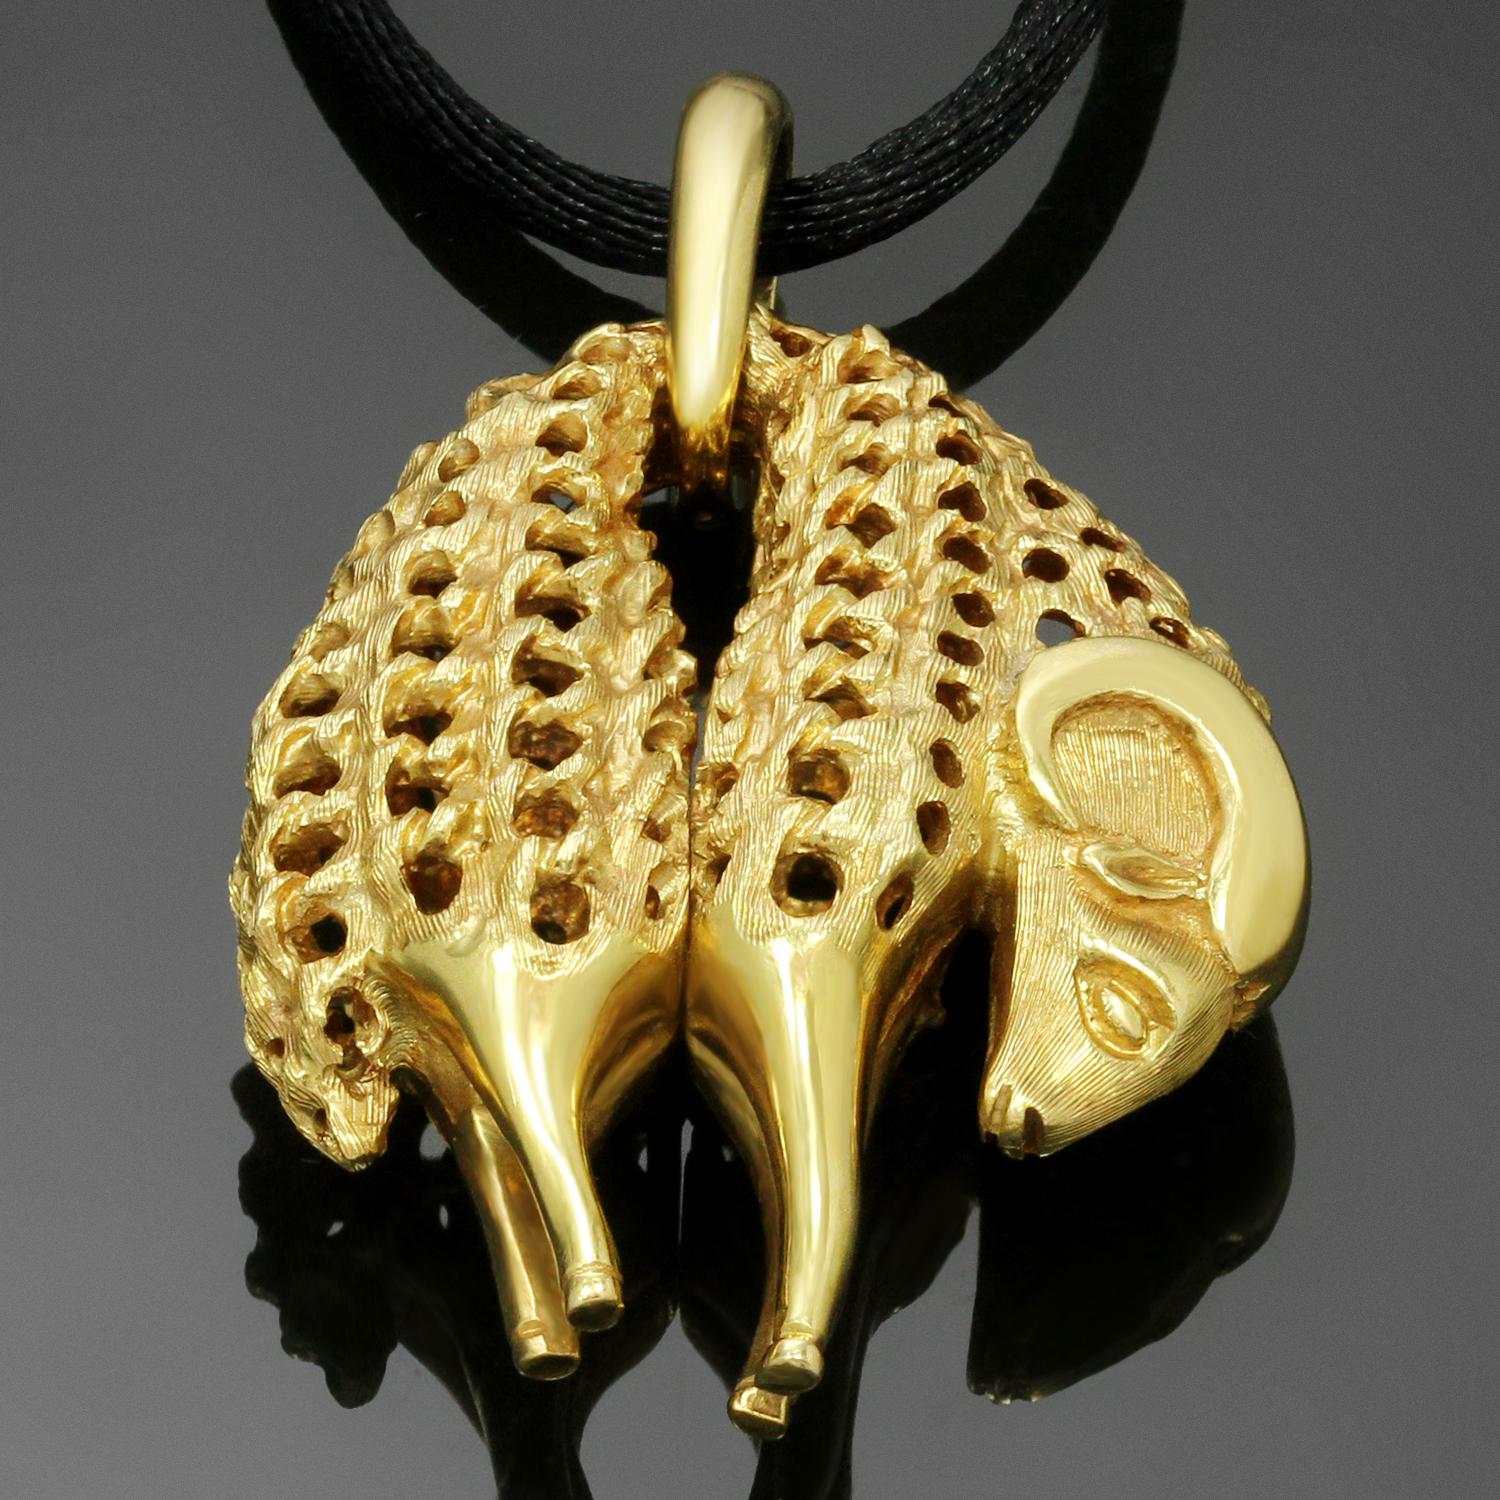 This rare and collectible Cartier pendant features a ram design crafted in 18k textured yellow gold. This design is inspired by the ancient Greek myth of the golden fleece made from a golden ram that saved a prince from being sacrificed, a symbol of